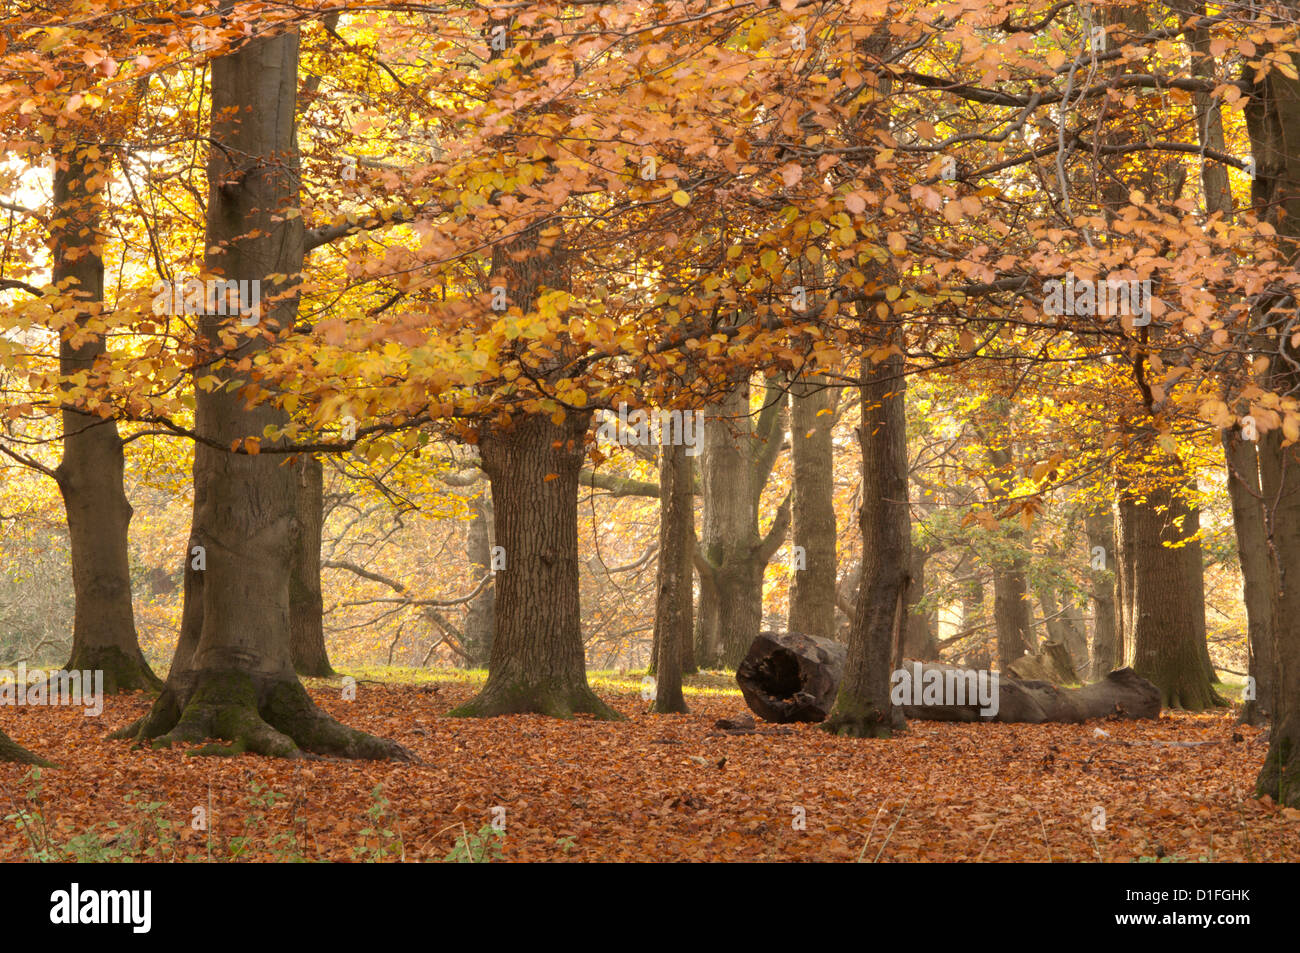 Mixed deciduous trees, Common beech, Sweet Chestnut, Oak, with autumn leaves. West Sussex, England, UK. November. Stock Photo